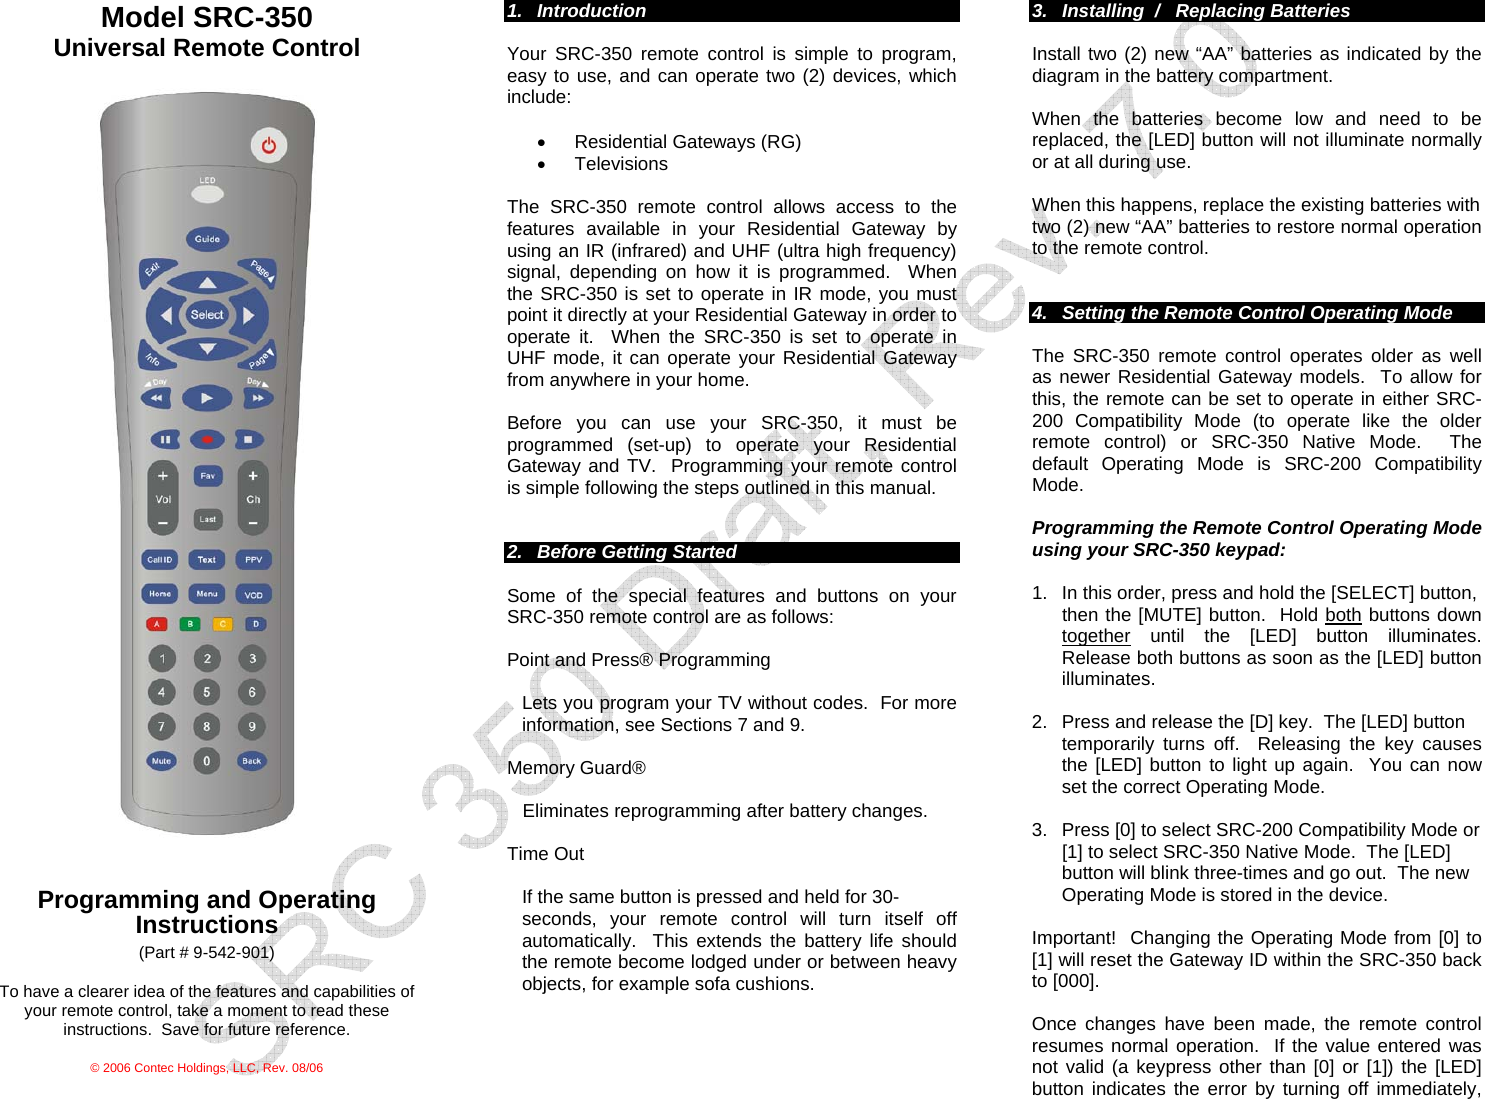  Model SRC-350 Universal Remote Control     Programming and Operating Instructions (Part # 9-542-901)  To have a clearer idea of the features and capabilities of your remote control, take a moment to read these instructions.  Save for future reference.  © 2006 Contec Holdings, LLC, Rev. 08/06  1. Introduction  Your SRC-350 remote control is simple to program, easy to use, and can operate two (2) devices, which include:   •  Residential Gateways (RG) • Televisions  The SRC-350 remote control allows access to the features available in your Residential Gateway by using an IR (infrared) and UHF (ultra high frequency) signal, depending on how it is programmed.  When the SRC-350 is set to operate in IR mode, you must point it directly at your Residential Gateway in order to operate it.  When the SRC-350 is set to operate in UHF mode, it can operate your Residential Gateway from anywhere in your home.    Before you can use your SRC-350, it must be programmed (set-up) to operate your Residential Gateway and TV.  Programming your remote control is simple following the steps outlined in this manual.   2.  Before Getting Started  Some of the special features and buttons on your SRC-350 remote control are as follows:   Point and Press® Programming  Lets you program your TV without codes.  For more information, see Sections 7 and 9.   Memory Guard®  Eliminates reprogramming after battery changes.  Time Out    If the same button is pressed and held for 30- seconds, your remote control will turn itself off automatically.  This extends the battery life should the remote become lodged under or between heavy objects, for example sofa cushions.     3.  Installing  /   Replacing Batteries  Install two (2) new “AA” batteries as indicated by the diagram in the battery compartment.    When the batteries become low and need to be replaced, the [LED] button will not illuminate normally or at all during use.    When this happens, replace the existing batteries with  two (2) new “AA” batteries to restore normal operation to the remote control.   4.  Setting the Remote Control Operating Mode  The SRC-350 remote control operates older as well as newer Residential Gateway models.  To allow for this, the remote can be set to operate in either SRC-200 Compatibility Mode (to operate like the older remote control) or SRC-350 Native Mode.  The default Operating Mode is SRC-200 Compatibility Mode.   Programming the Remote Control Operating Mode using your SRC-350 keypad:  1.  In this order, press and hold the [SELECT] button,  then the [MUTE] button.  Hold both buttons down together until the [LED] button illuminates.  Release both buttons as soon as the [LED] button illuminates.    2.  Press and release the [D] key.  The [LED] button  temporarily turns off.  Releasing the key causes the [LED] button to light up again.  You can now set the correct Operating Mode.    3.  Press [0] to select SRC-200 Compatibility Mode or      [1] to select SRC-350 Native Mode.  The [LED]  button will blink three-times and go out.  The new  Operating Mode is stored in the device.   Important!  Changing the Operating Mode from [0] to [1] will reset the Gateway ID within the SRC-350 back to [000].     Once changes have been made, the remote control resumes normal operation.  If the value entered was not valid (a keypress other than [0] or [1]) the [LED] button indicates the error by turning off immediately, 